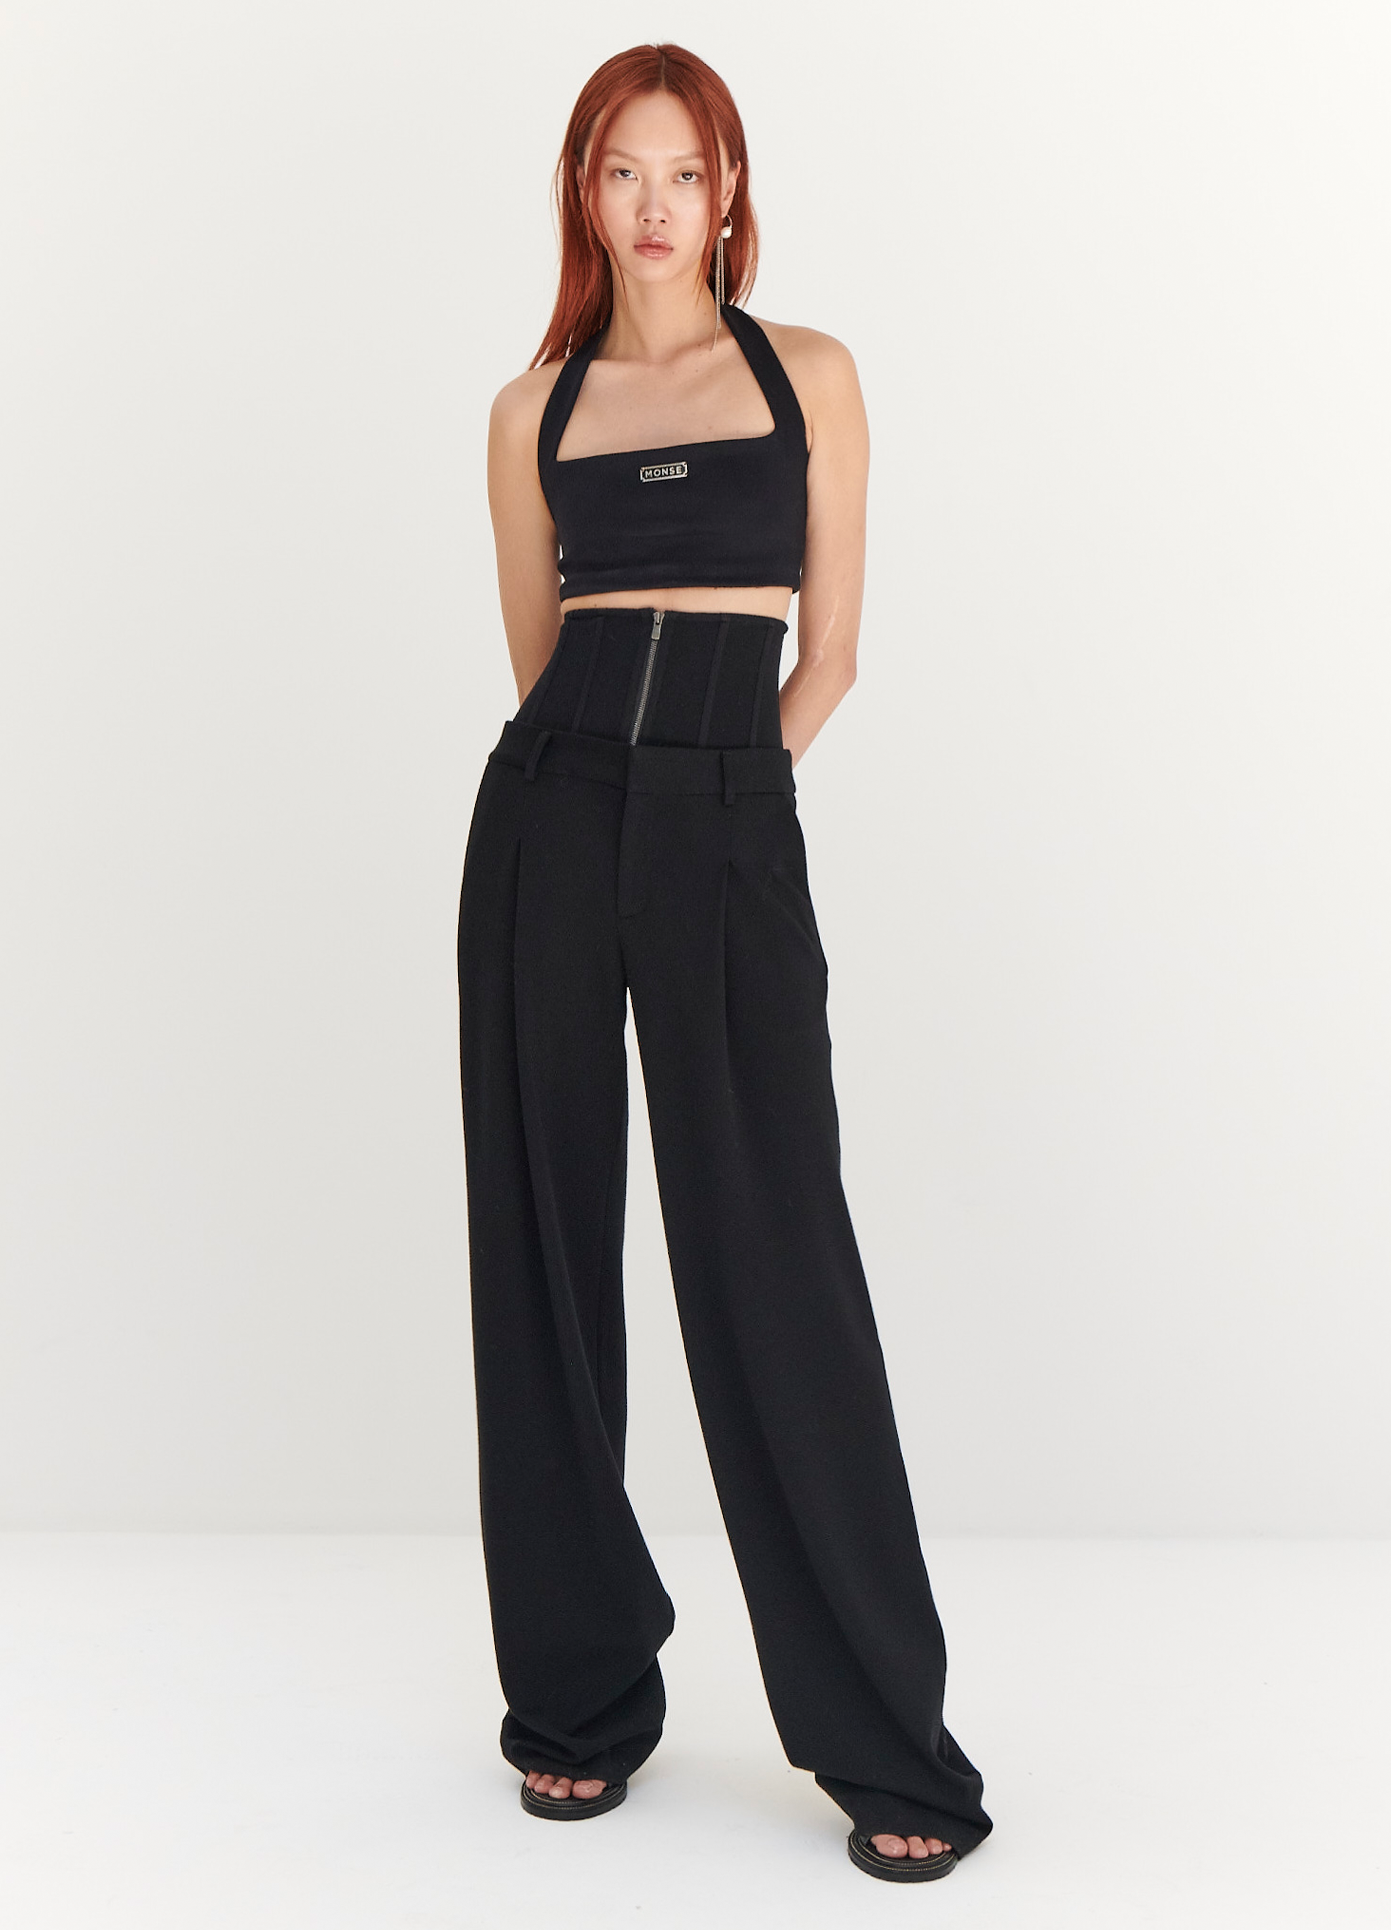 MONSE Jersey Bustier Trousers in Black on model with arms behind back full front view